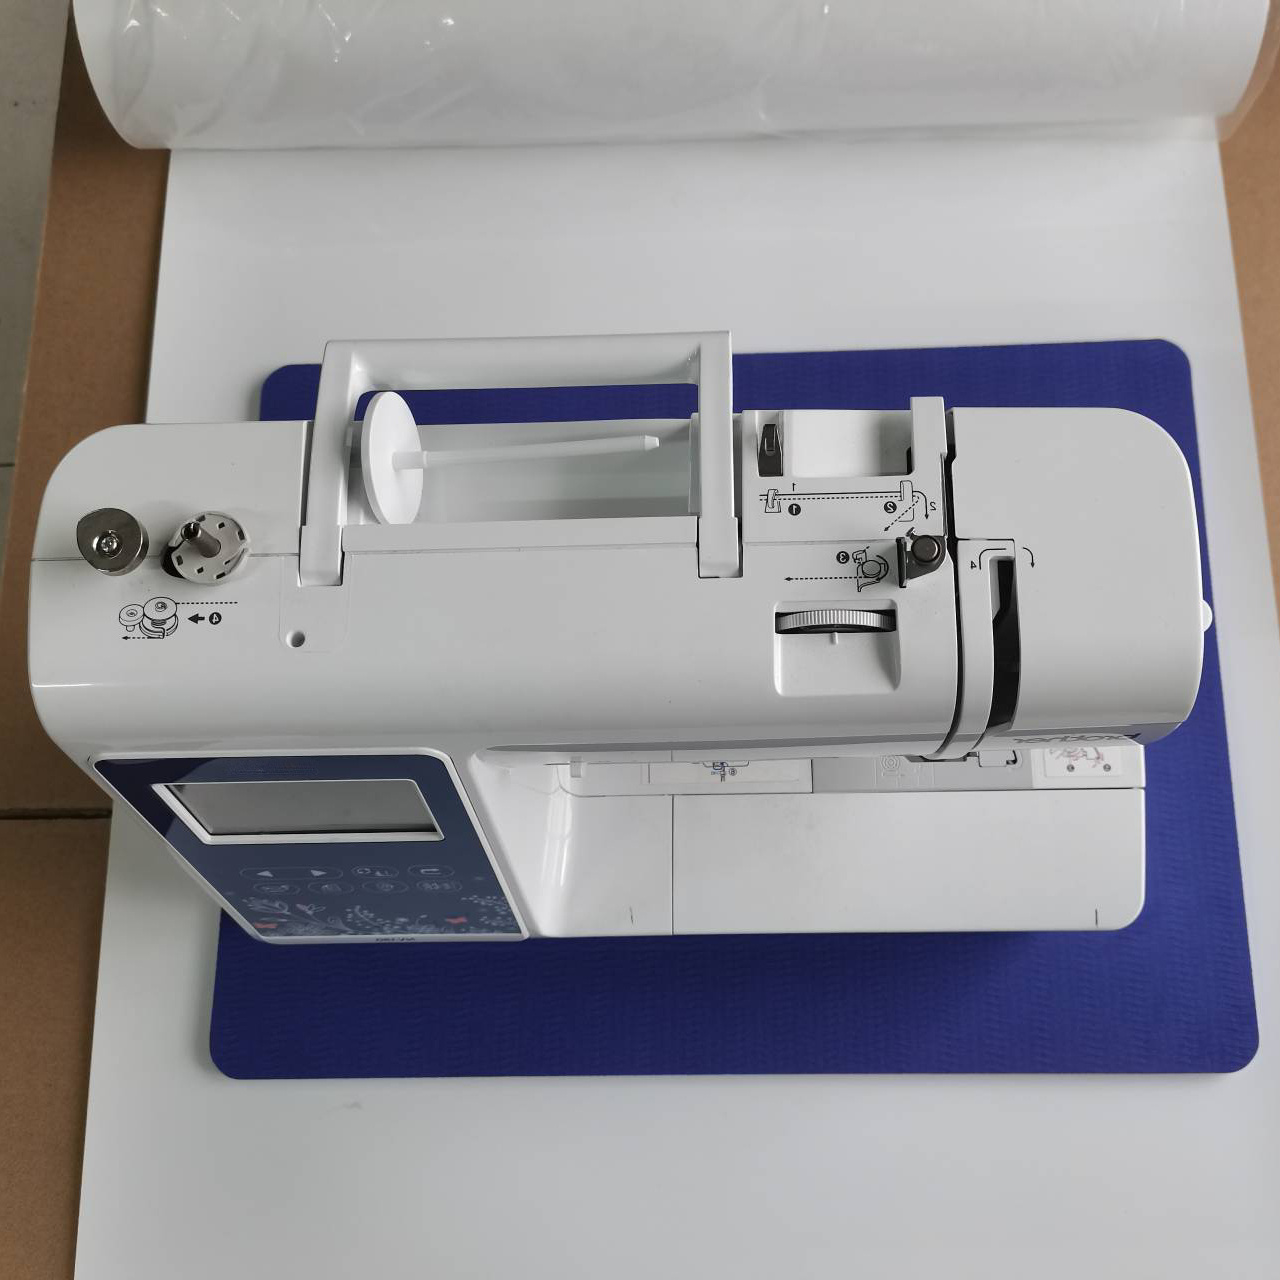 How to Make a Serger Mat to Reduce Vibration and Sound